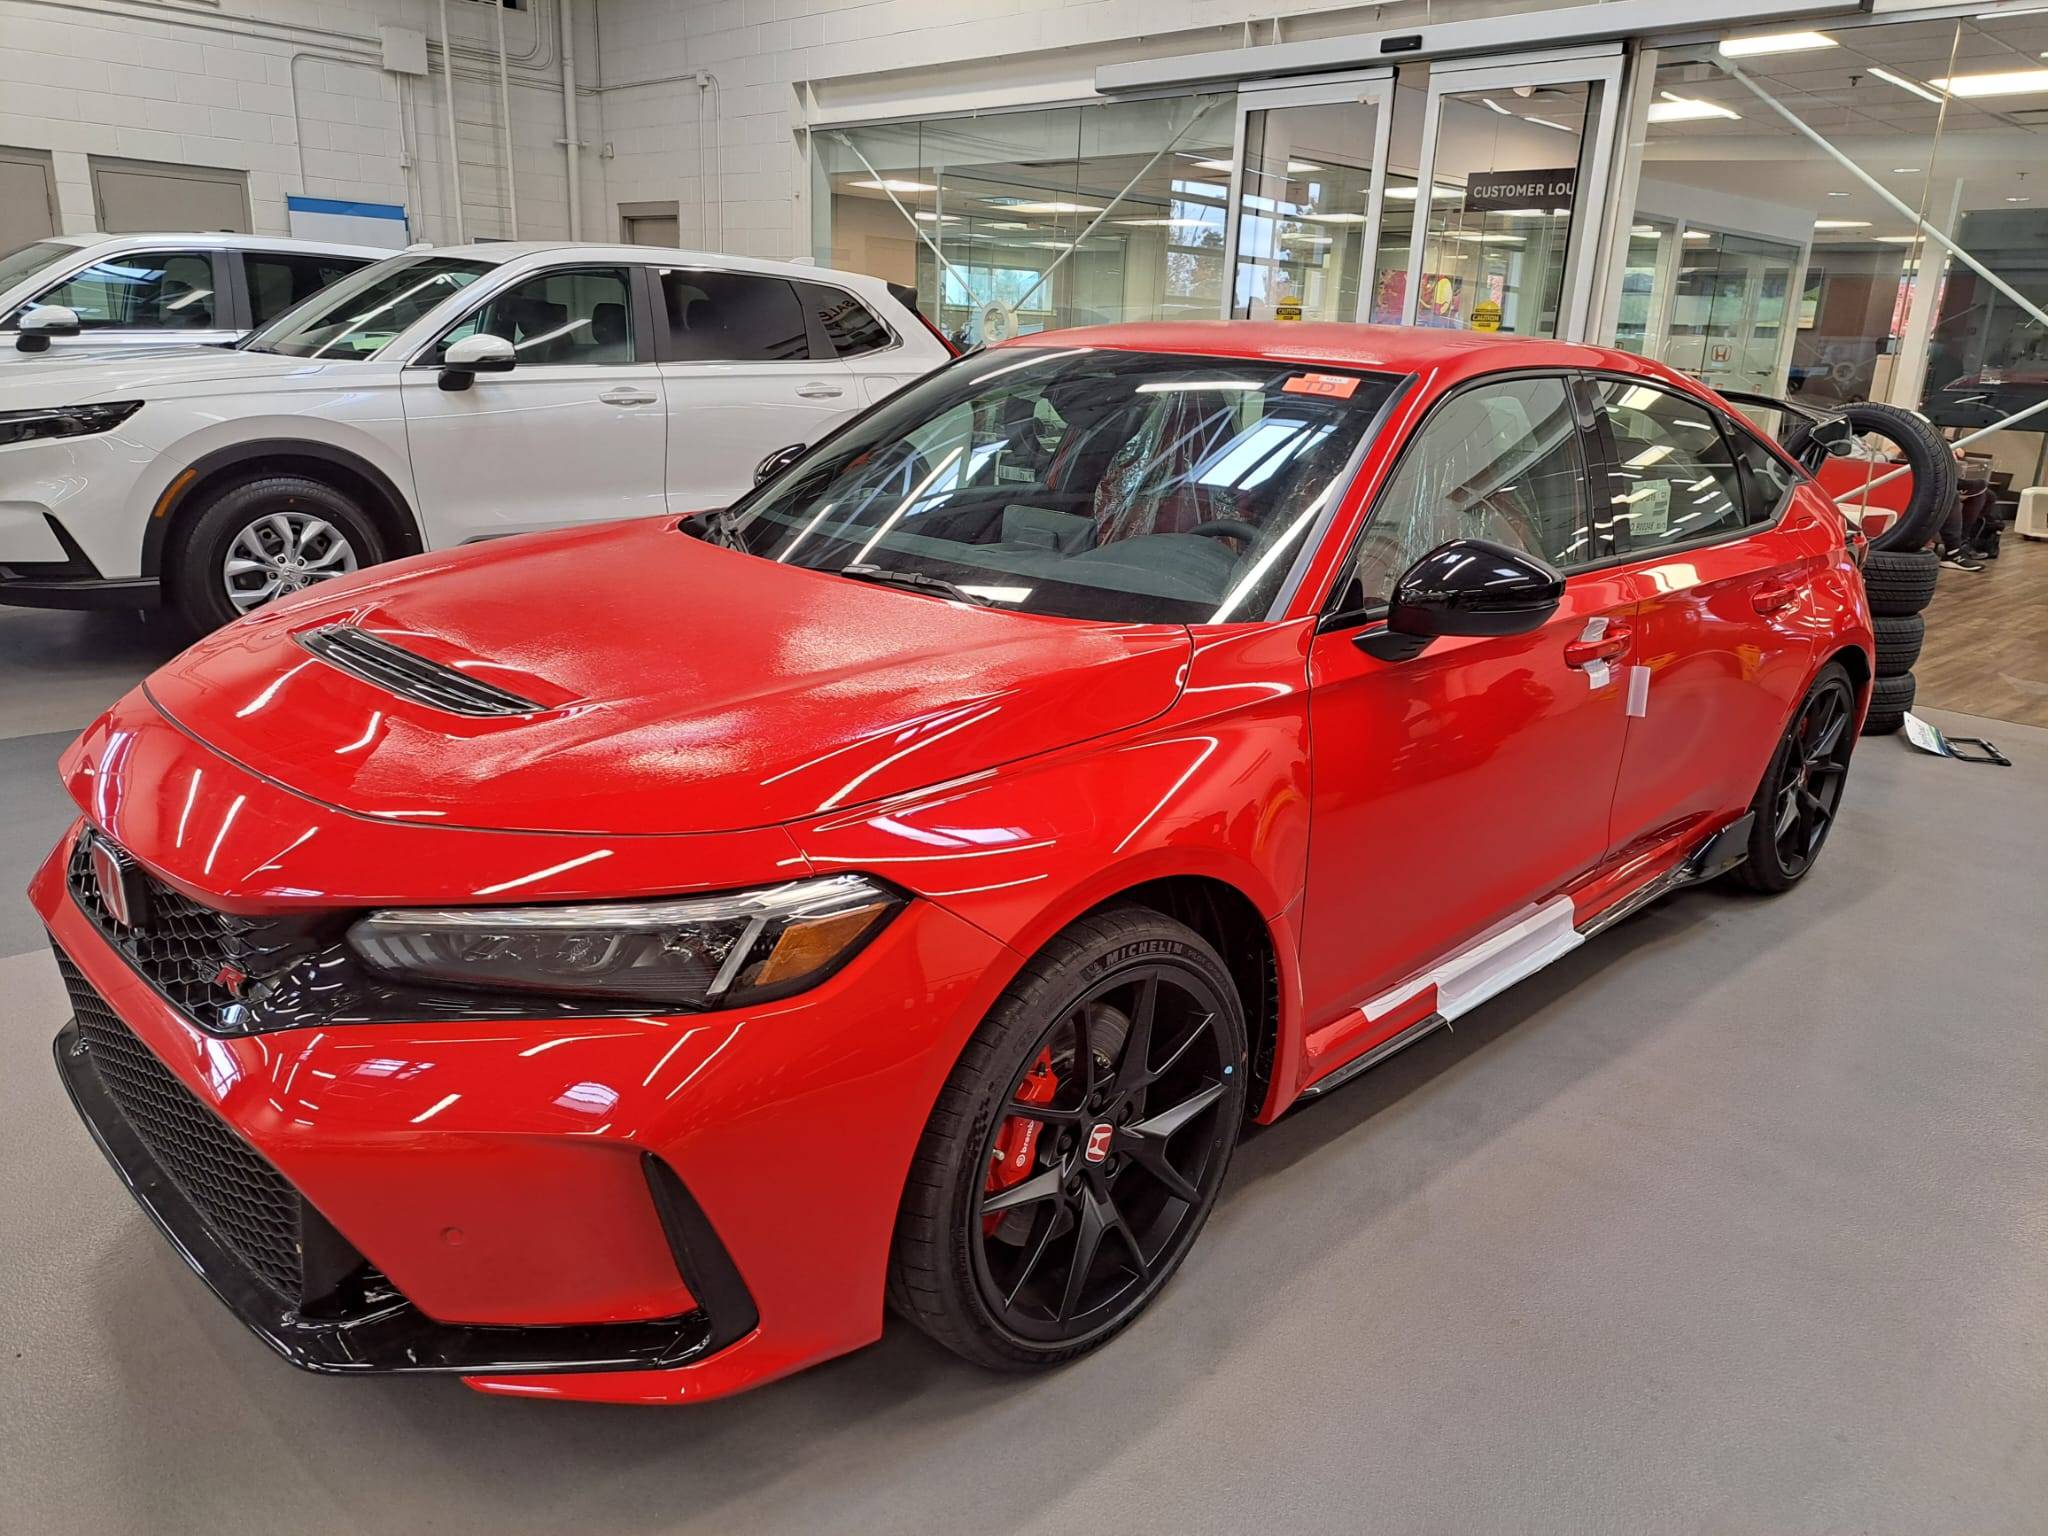 11th Gen Honda Civic Canadian dealer asked what colour Type R I want IMG-20221115-WA0003